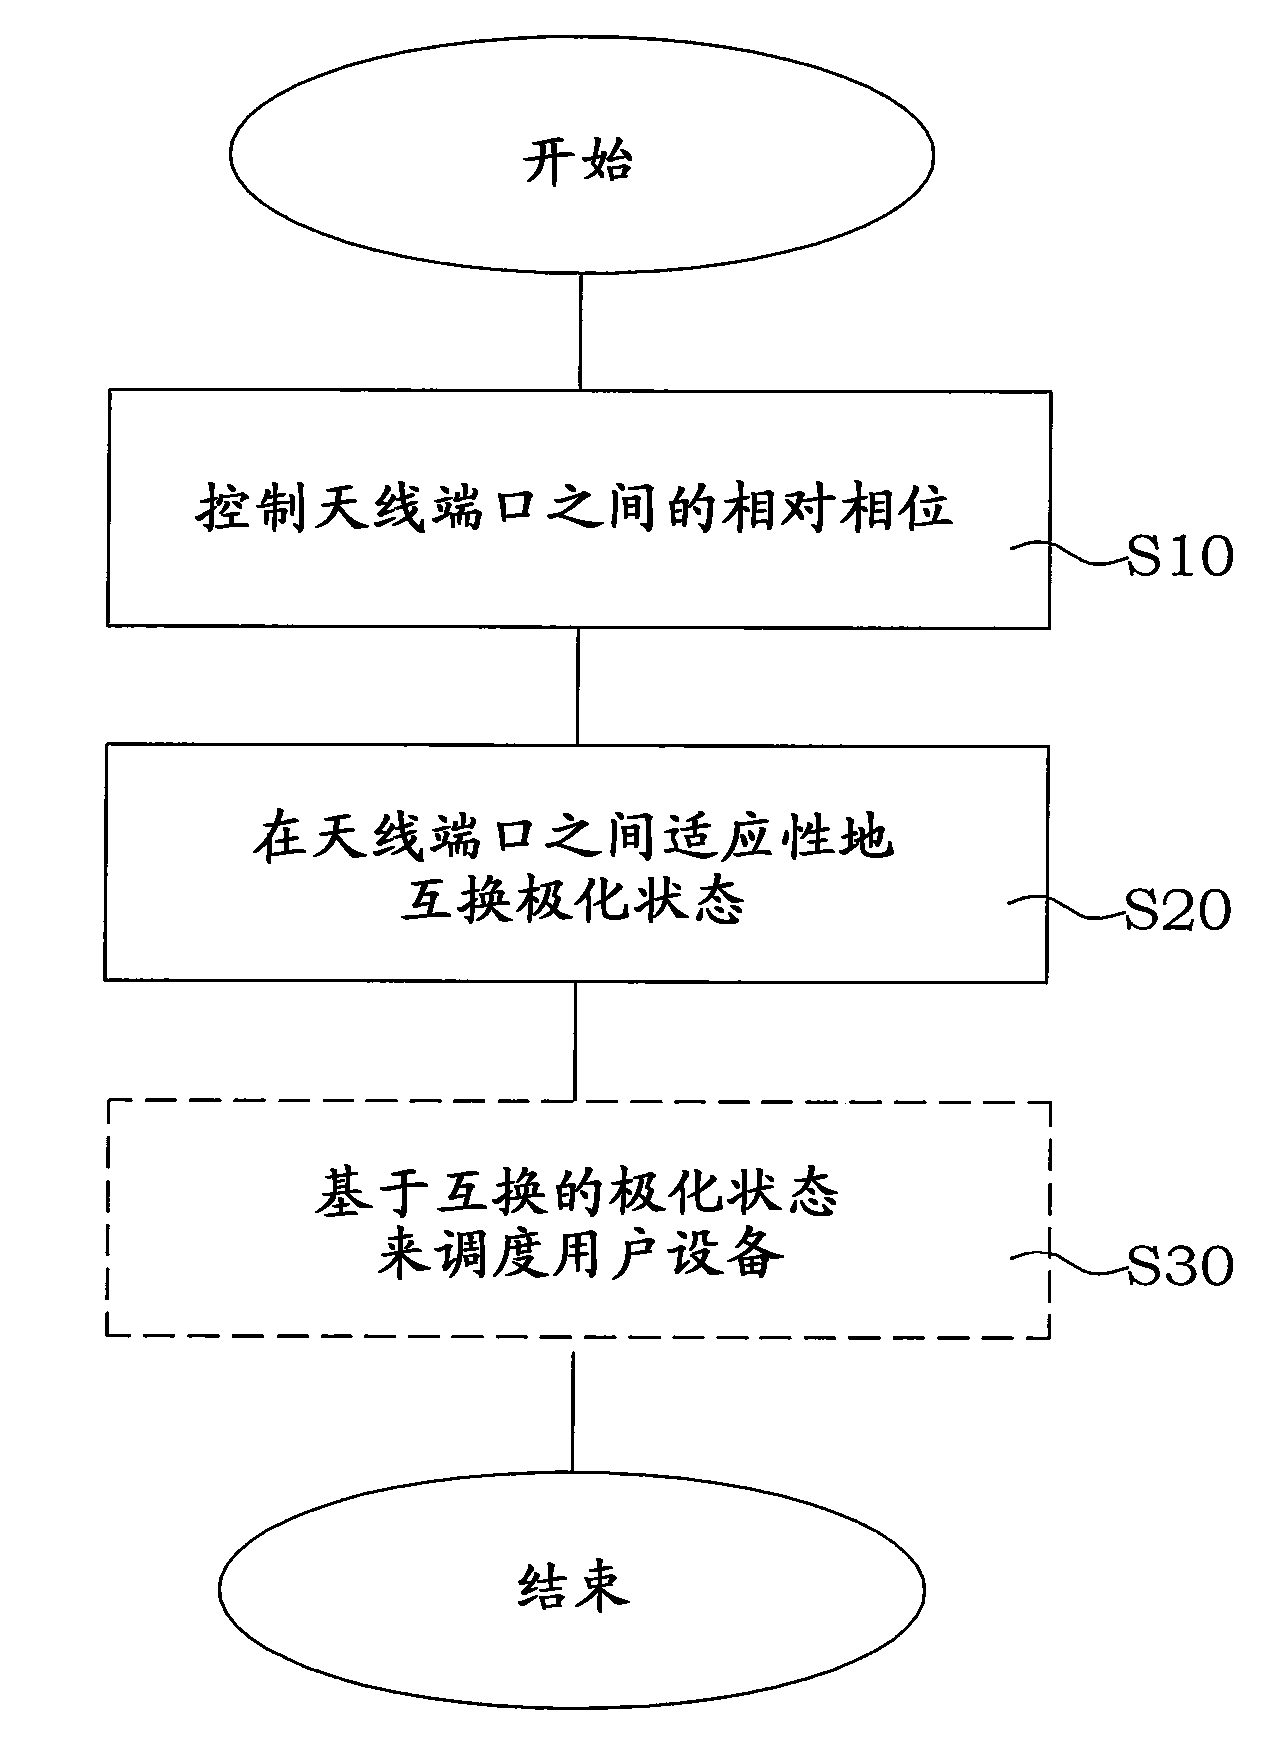 Method and arrangement for polarization control in a communication system